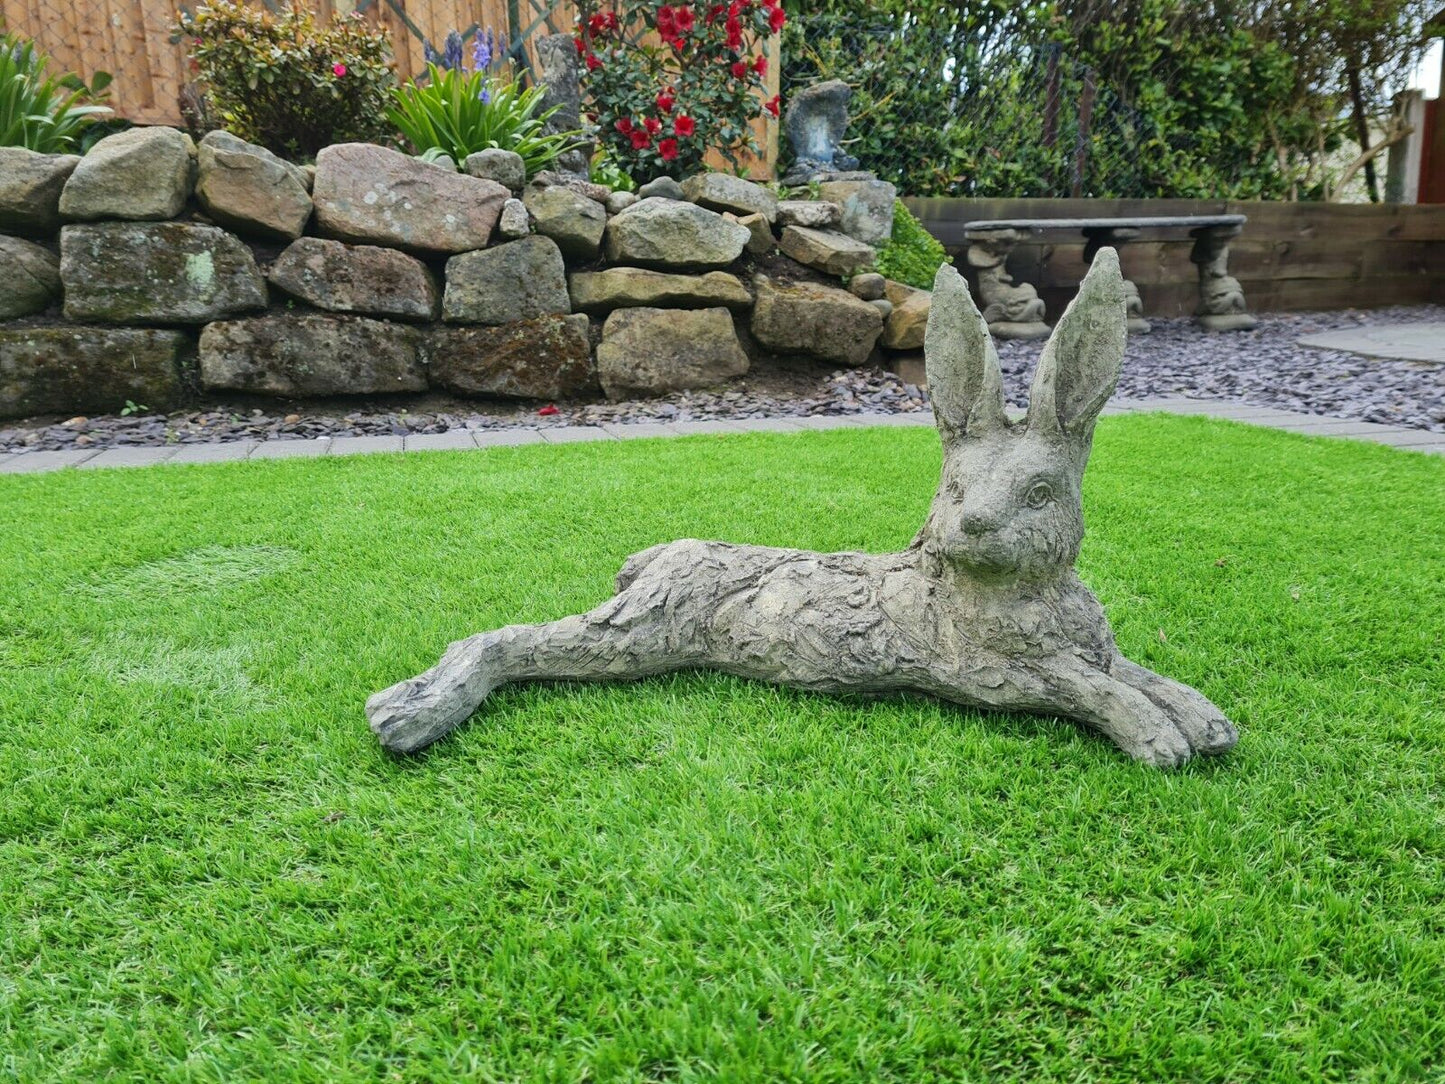 Hampshire Hare garden ornament - DELIVERY INCLUDED